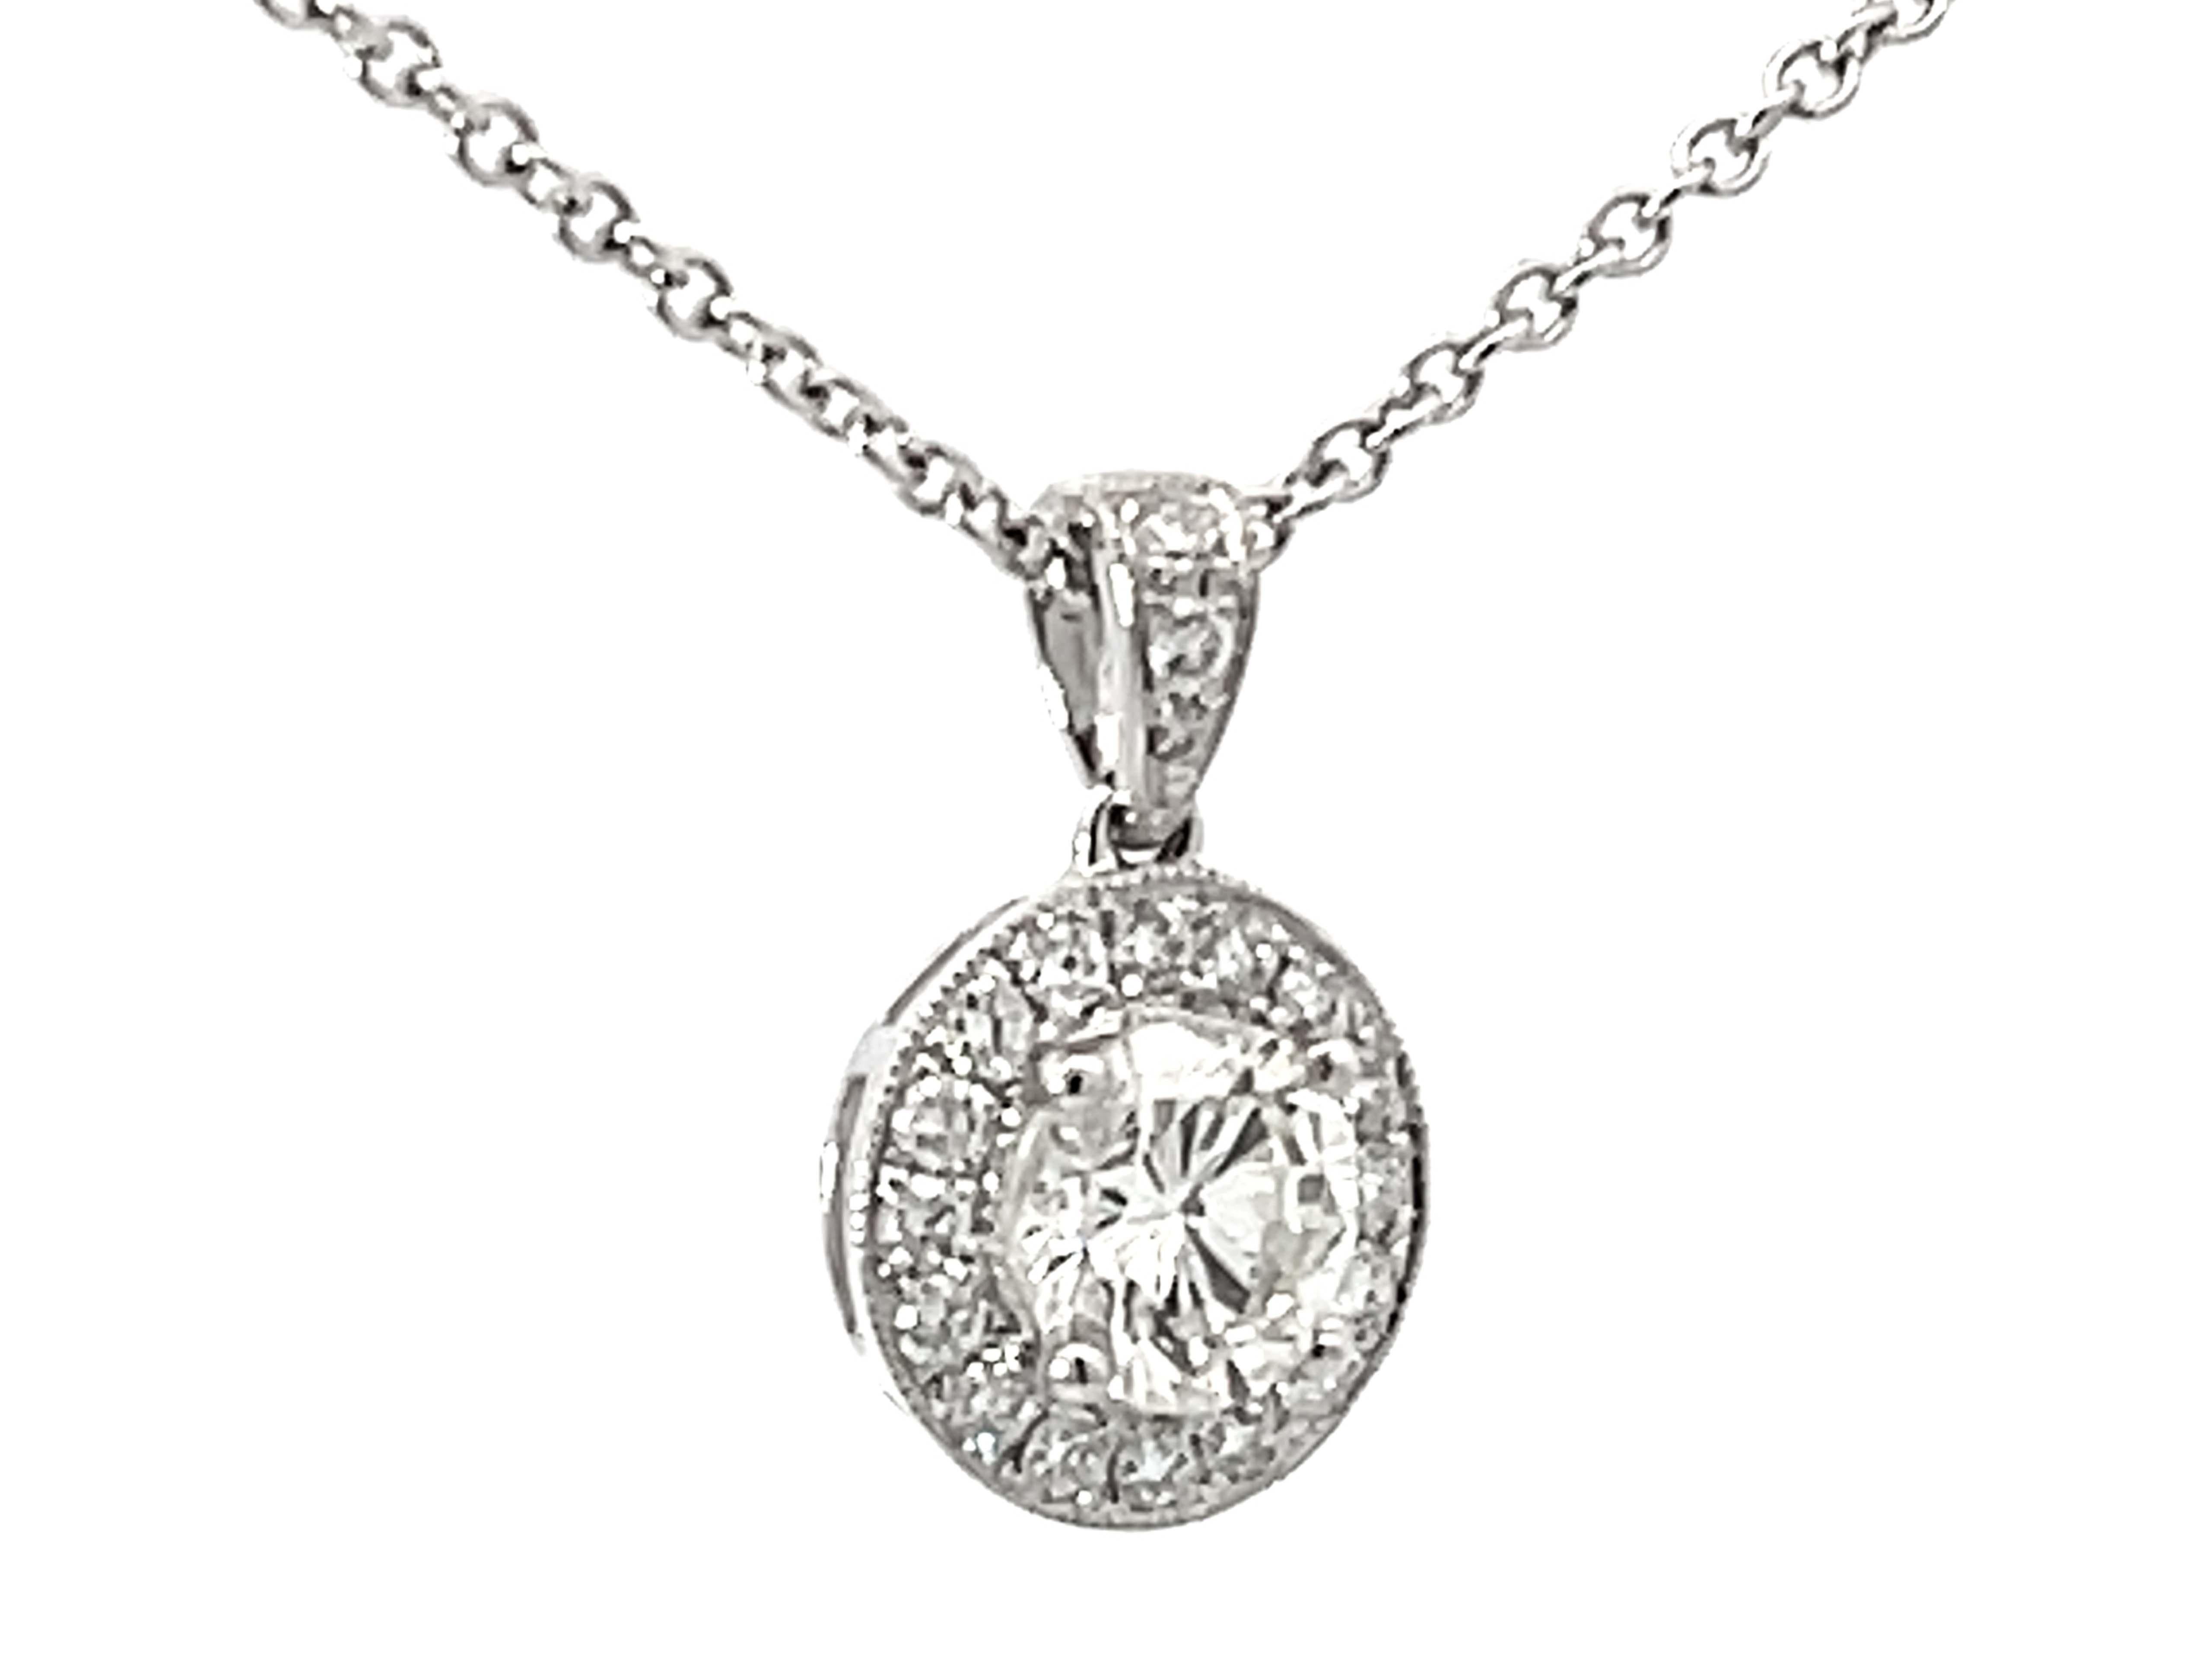 Modern 1.15 Carat Center Diamond Halo Pendant Necklace Solid White Gold For Sale